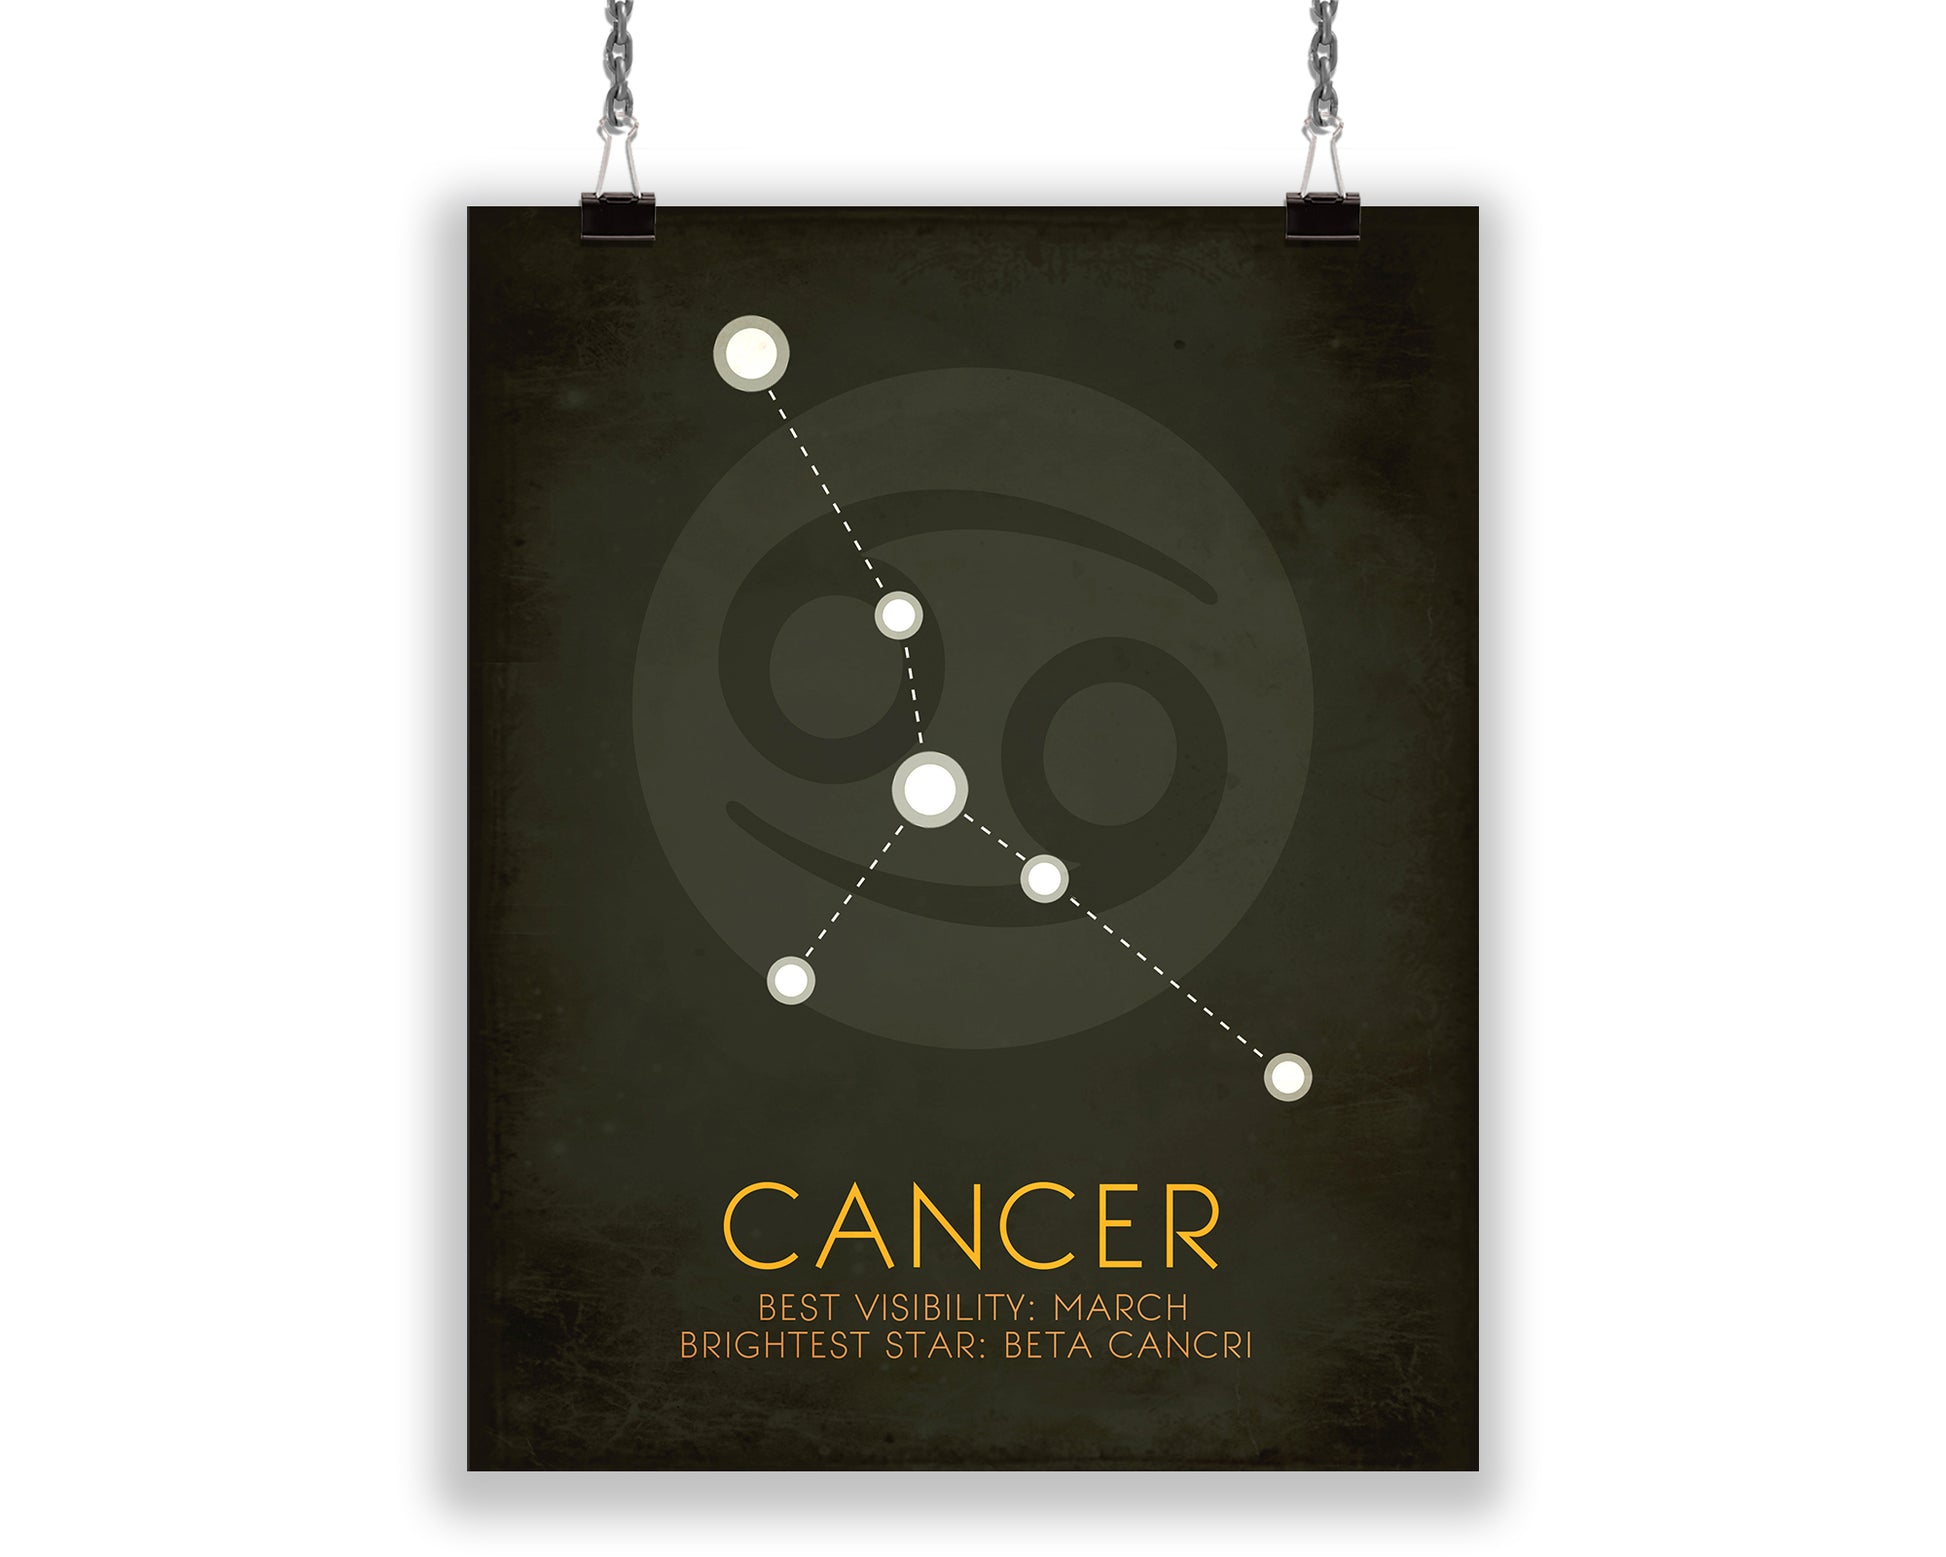 This gray art print shows the Cancer constellation, the best month for optimal visibility, and the brightest star.